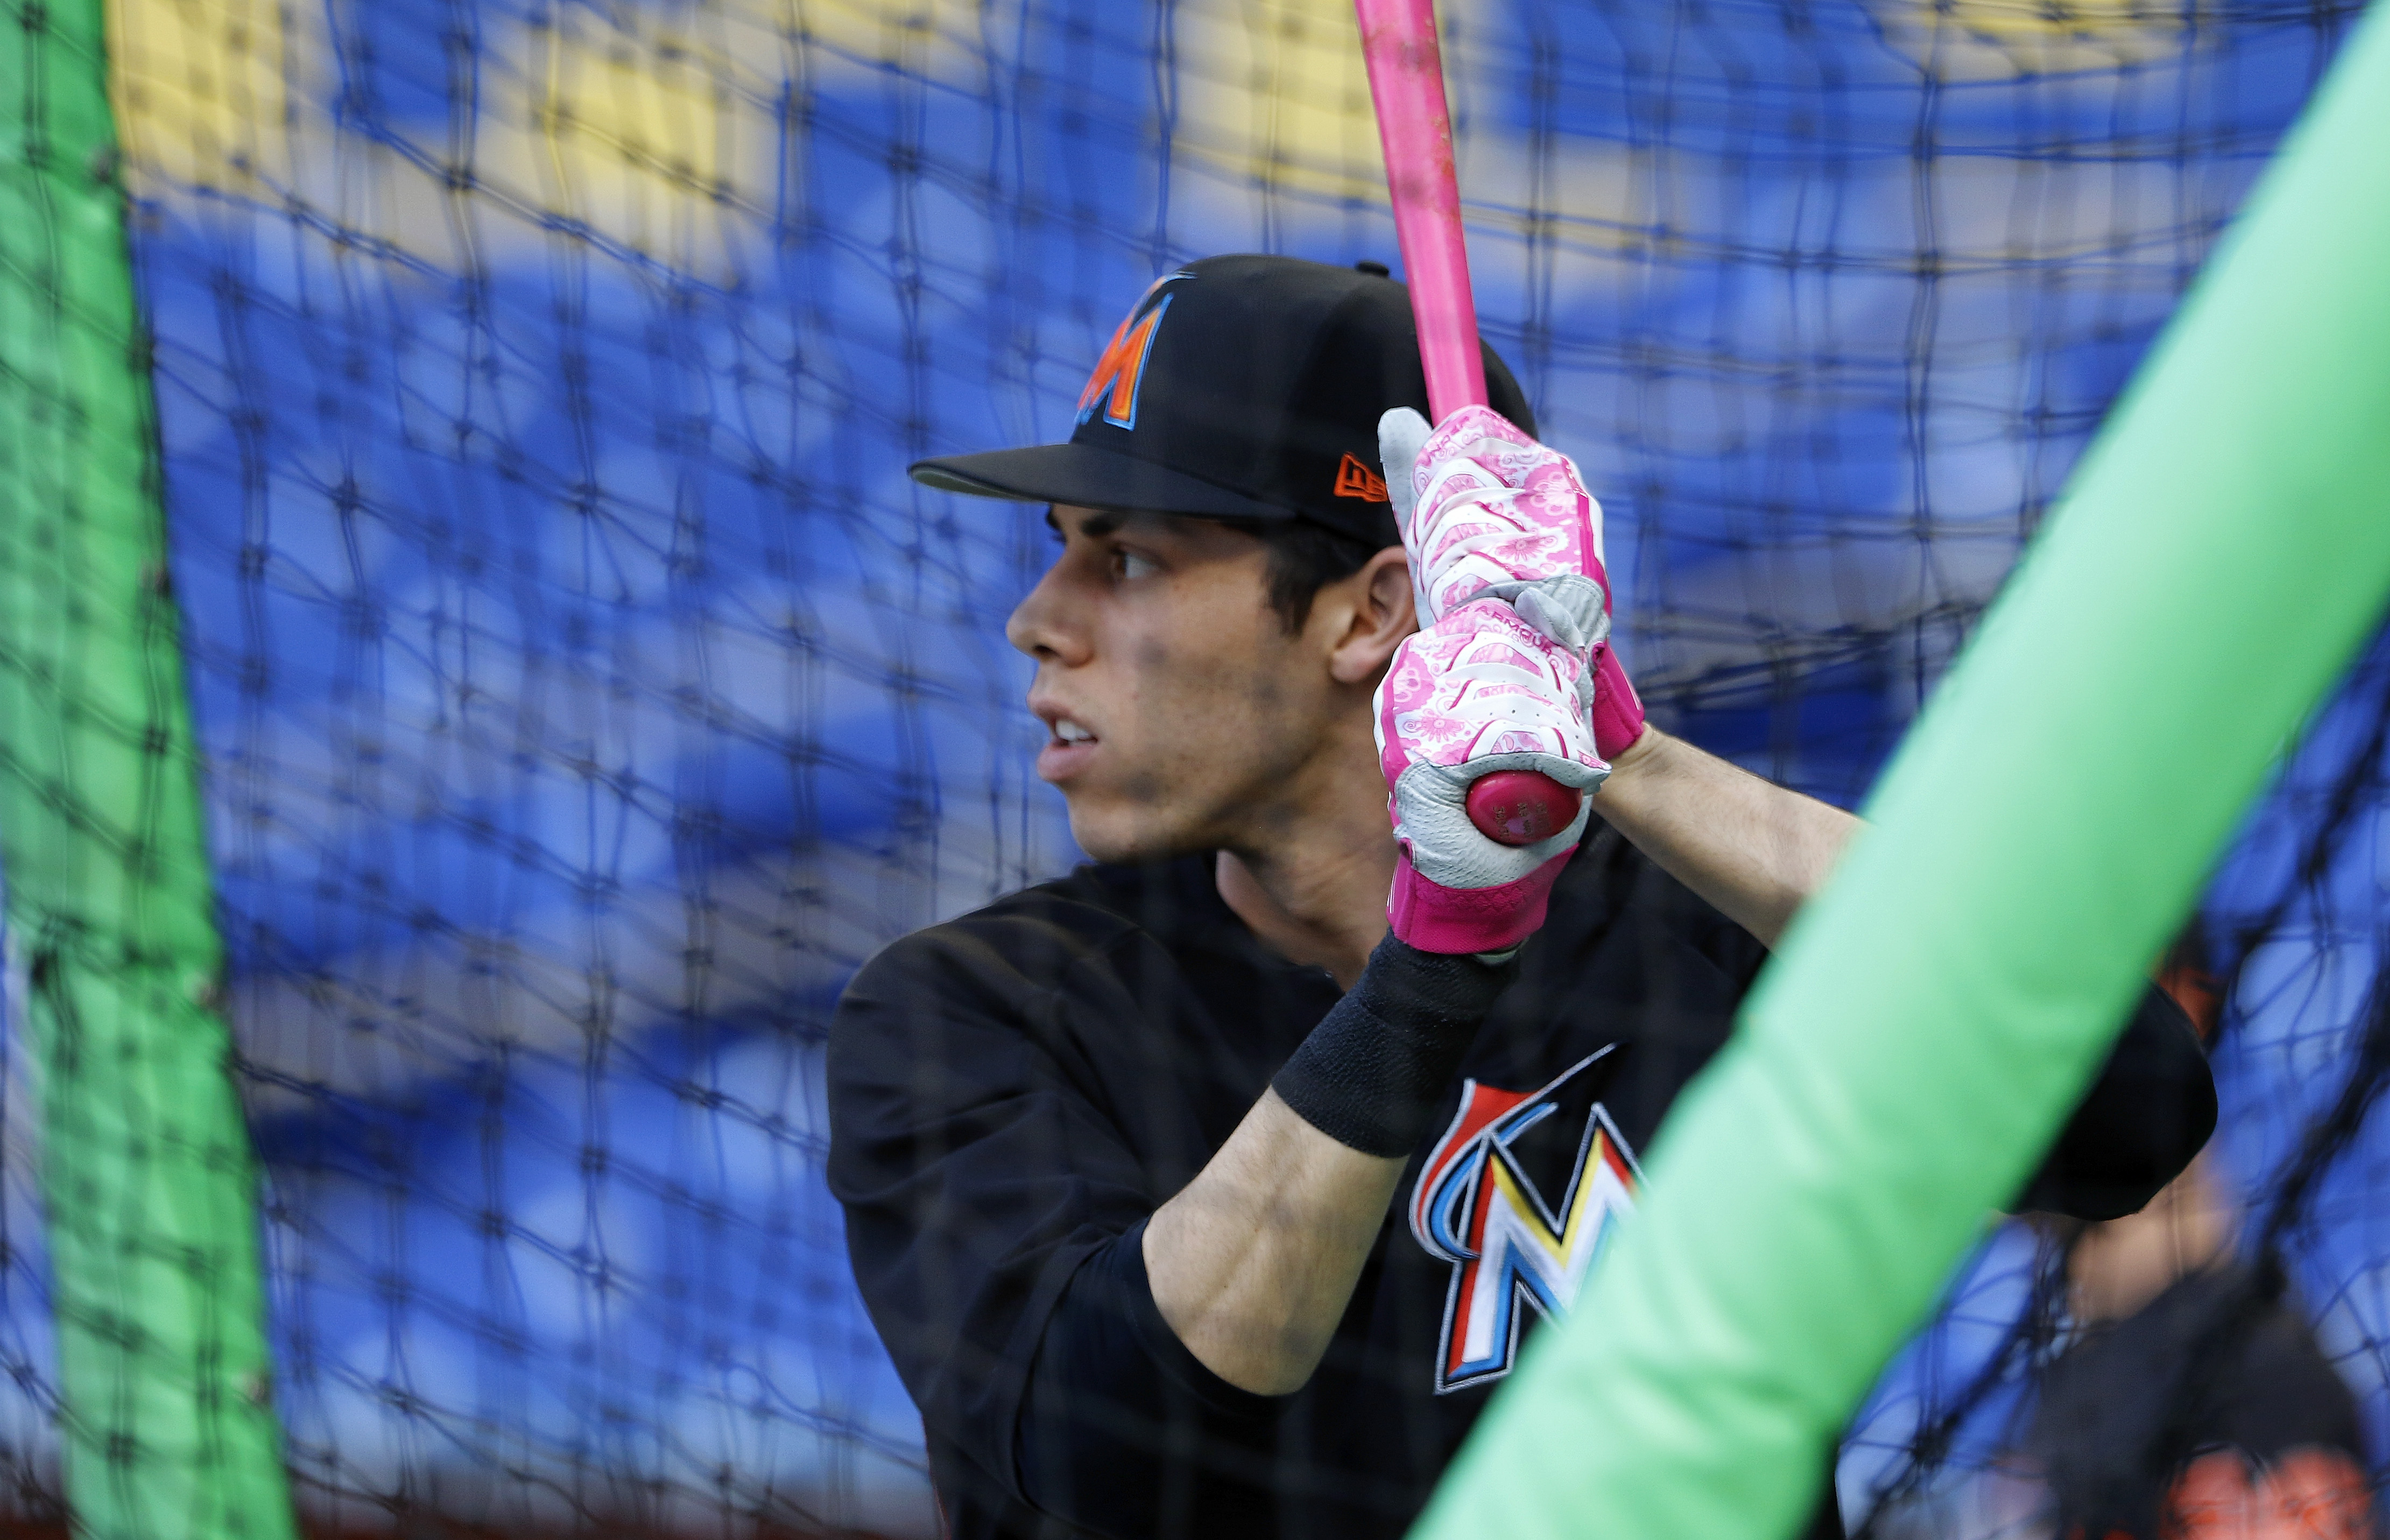 Marlins trade Christian Yelich to Brewers - The Boston Globe